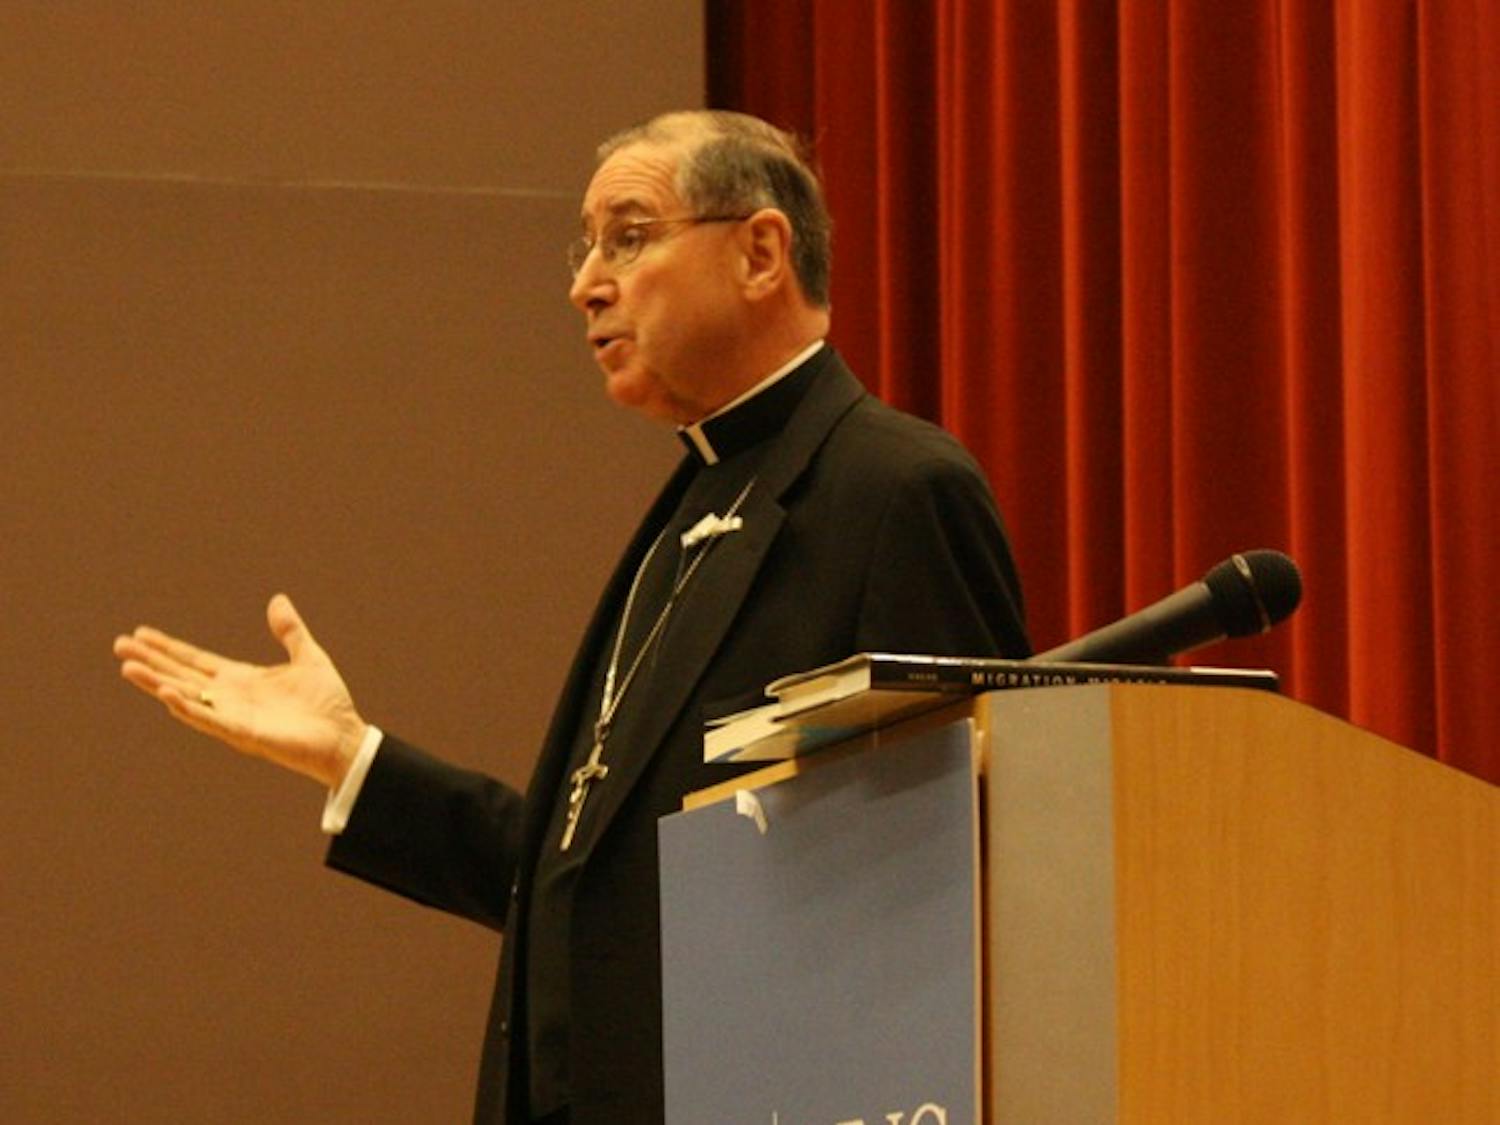 Cardinal Roger Mahony speaks on immigration reform in FedEx Global Center at 5:30 PM on February 2, 2011. Mahony's speech touched on an array of economic, legal, and social issues capitalizing on that immigration is a moral issue. Mahony's speech rich with biblical references to draw connections between the framework that governs immigration and that of the Catholic Church.